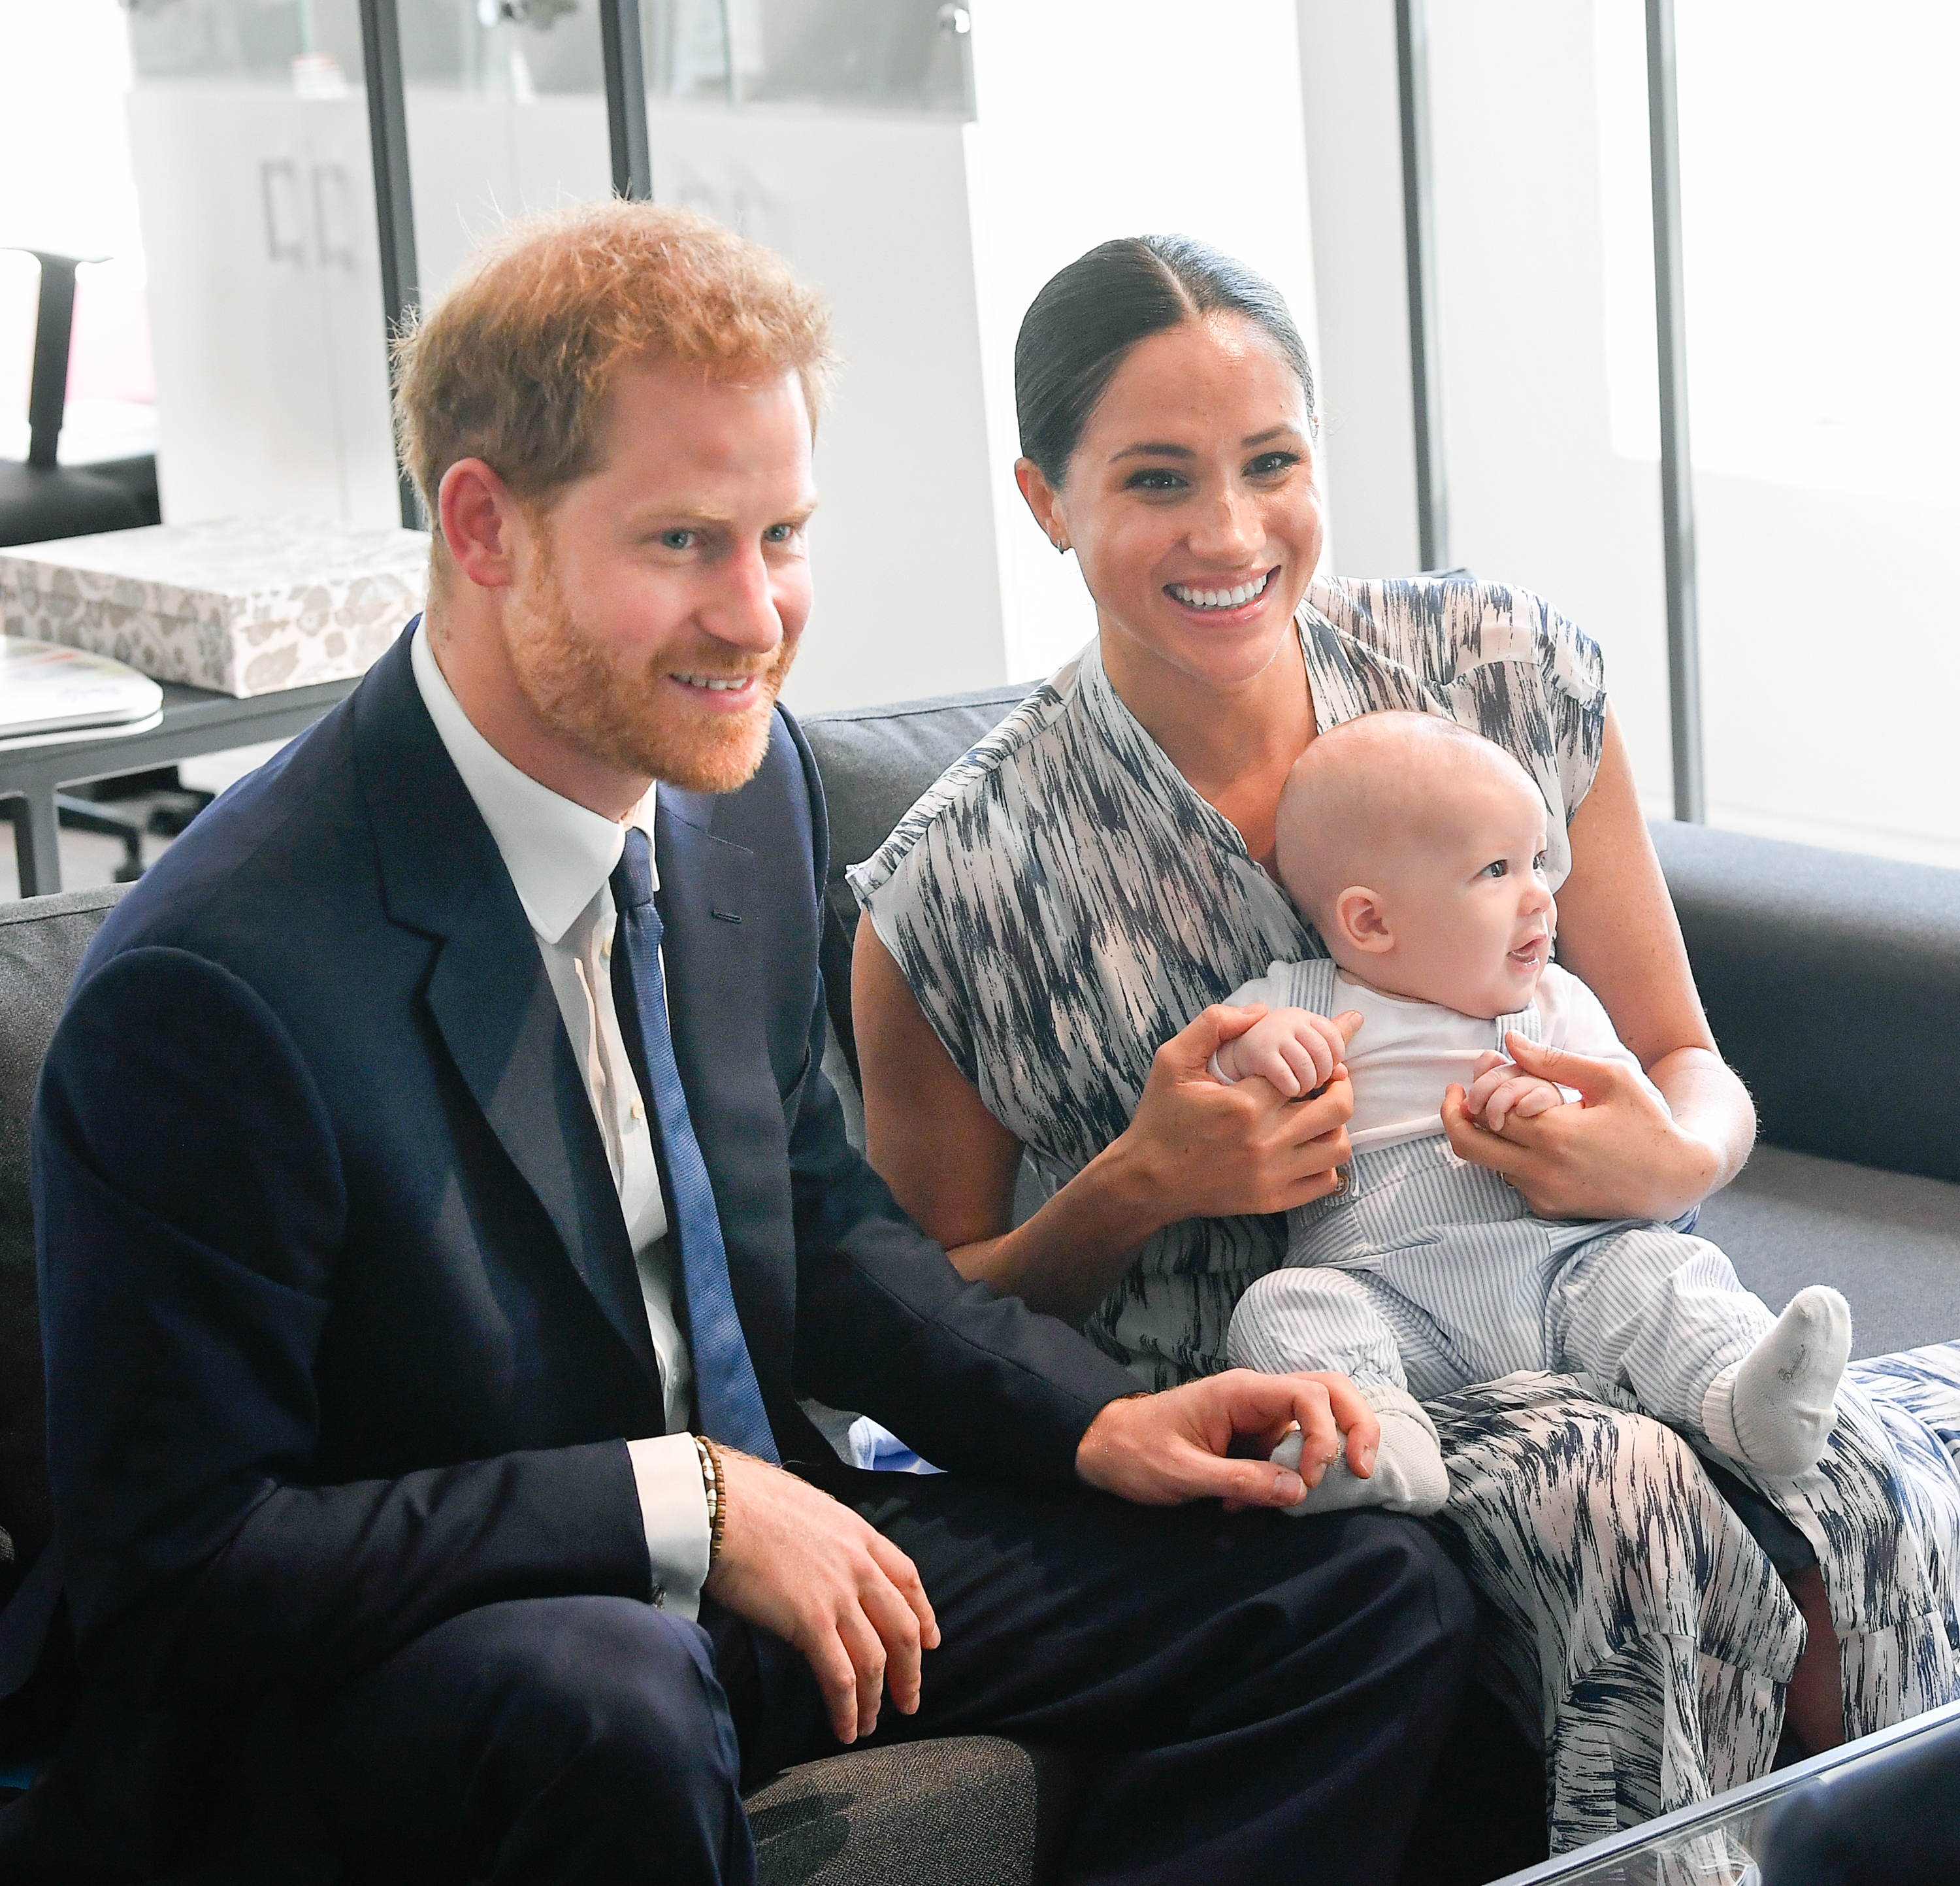 Prince Harry, Meghan Markle, and Prince Archie at the at the Desmond & Leah Tutu Legacy Foundation in South Africa in 2019 | Source: Getty Images